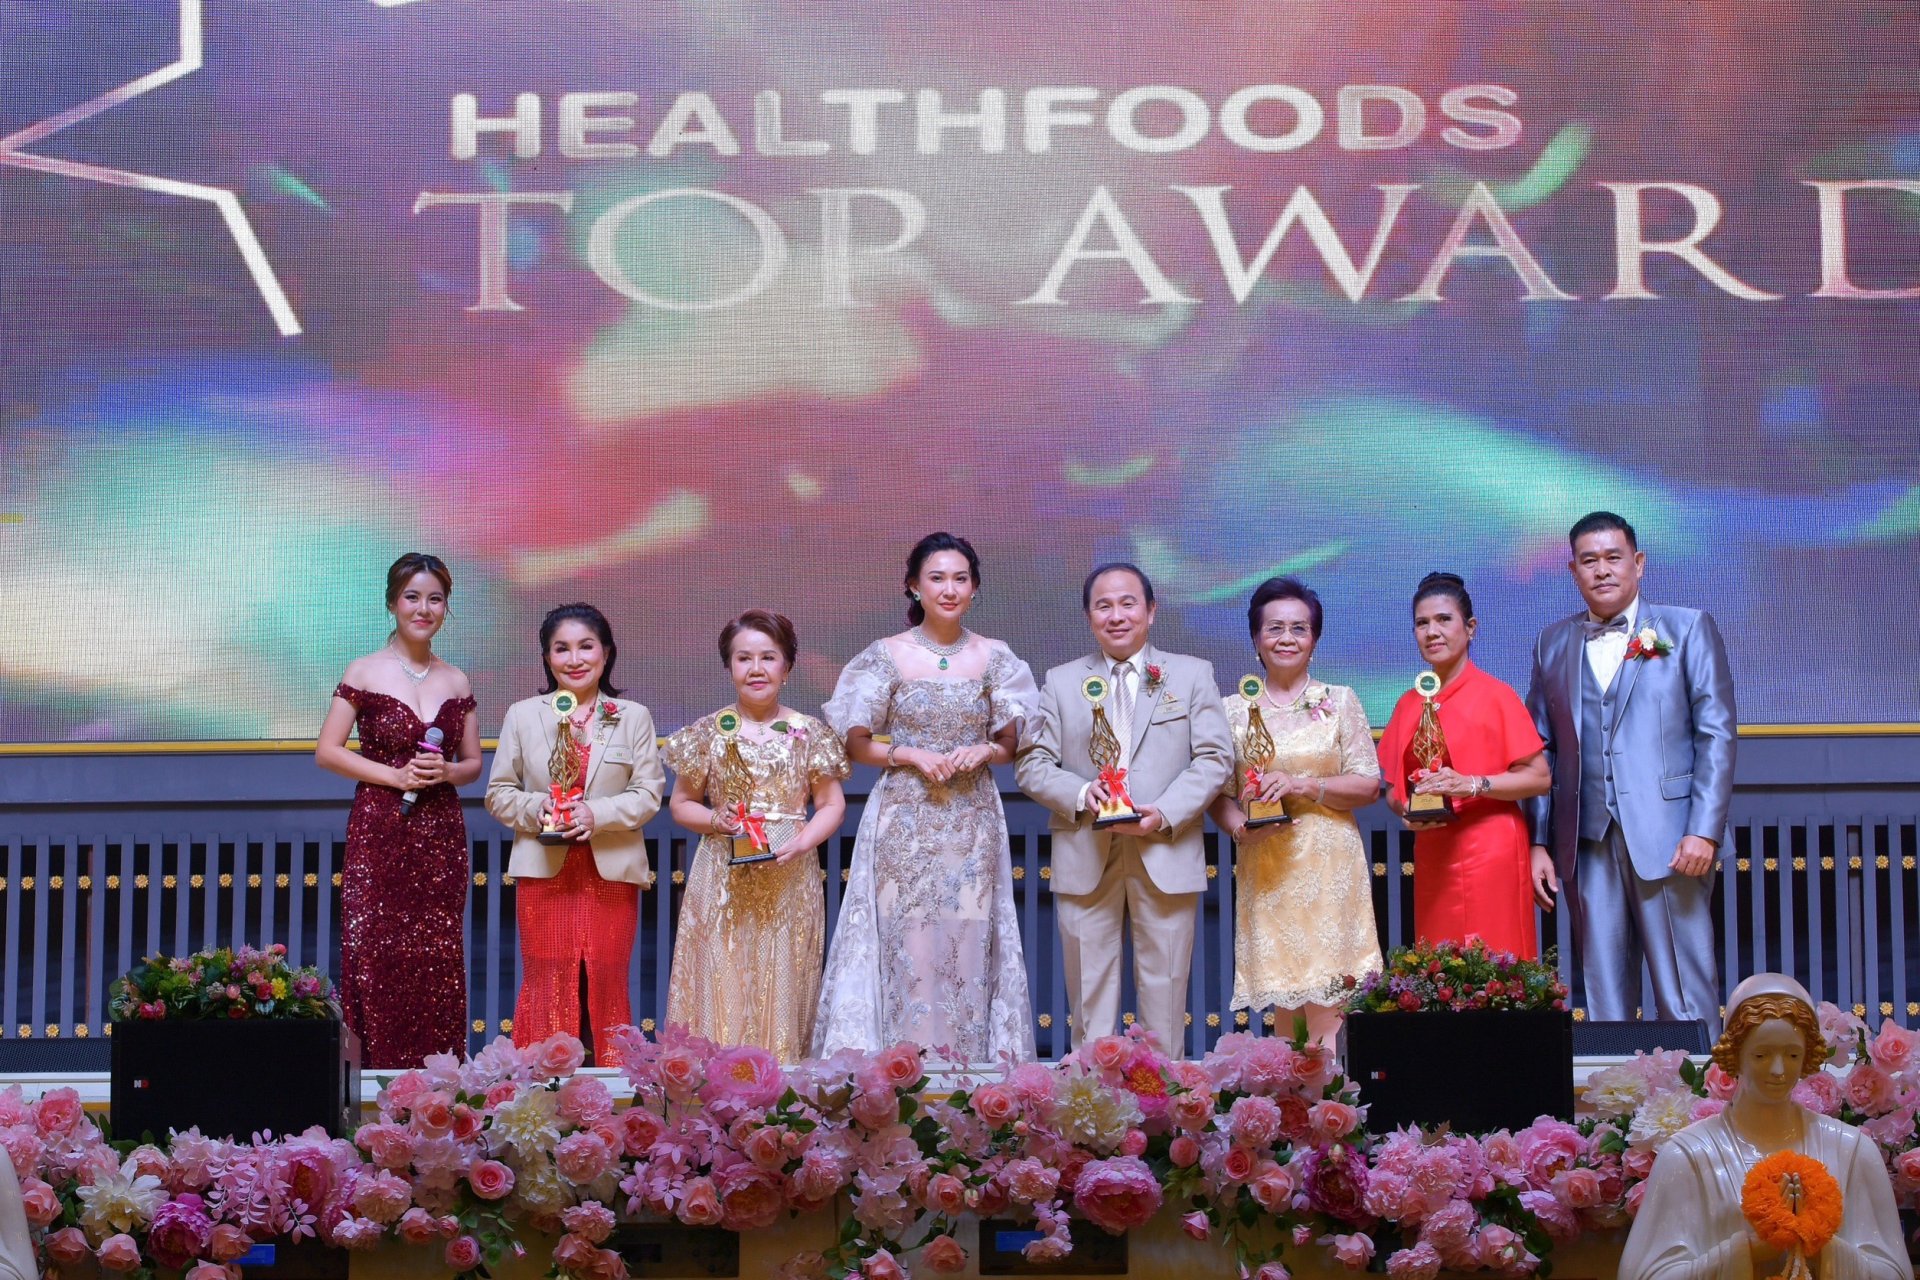  "Healthfoods Network" Celebrates the success of the year 2566.